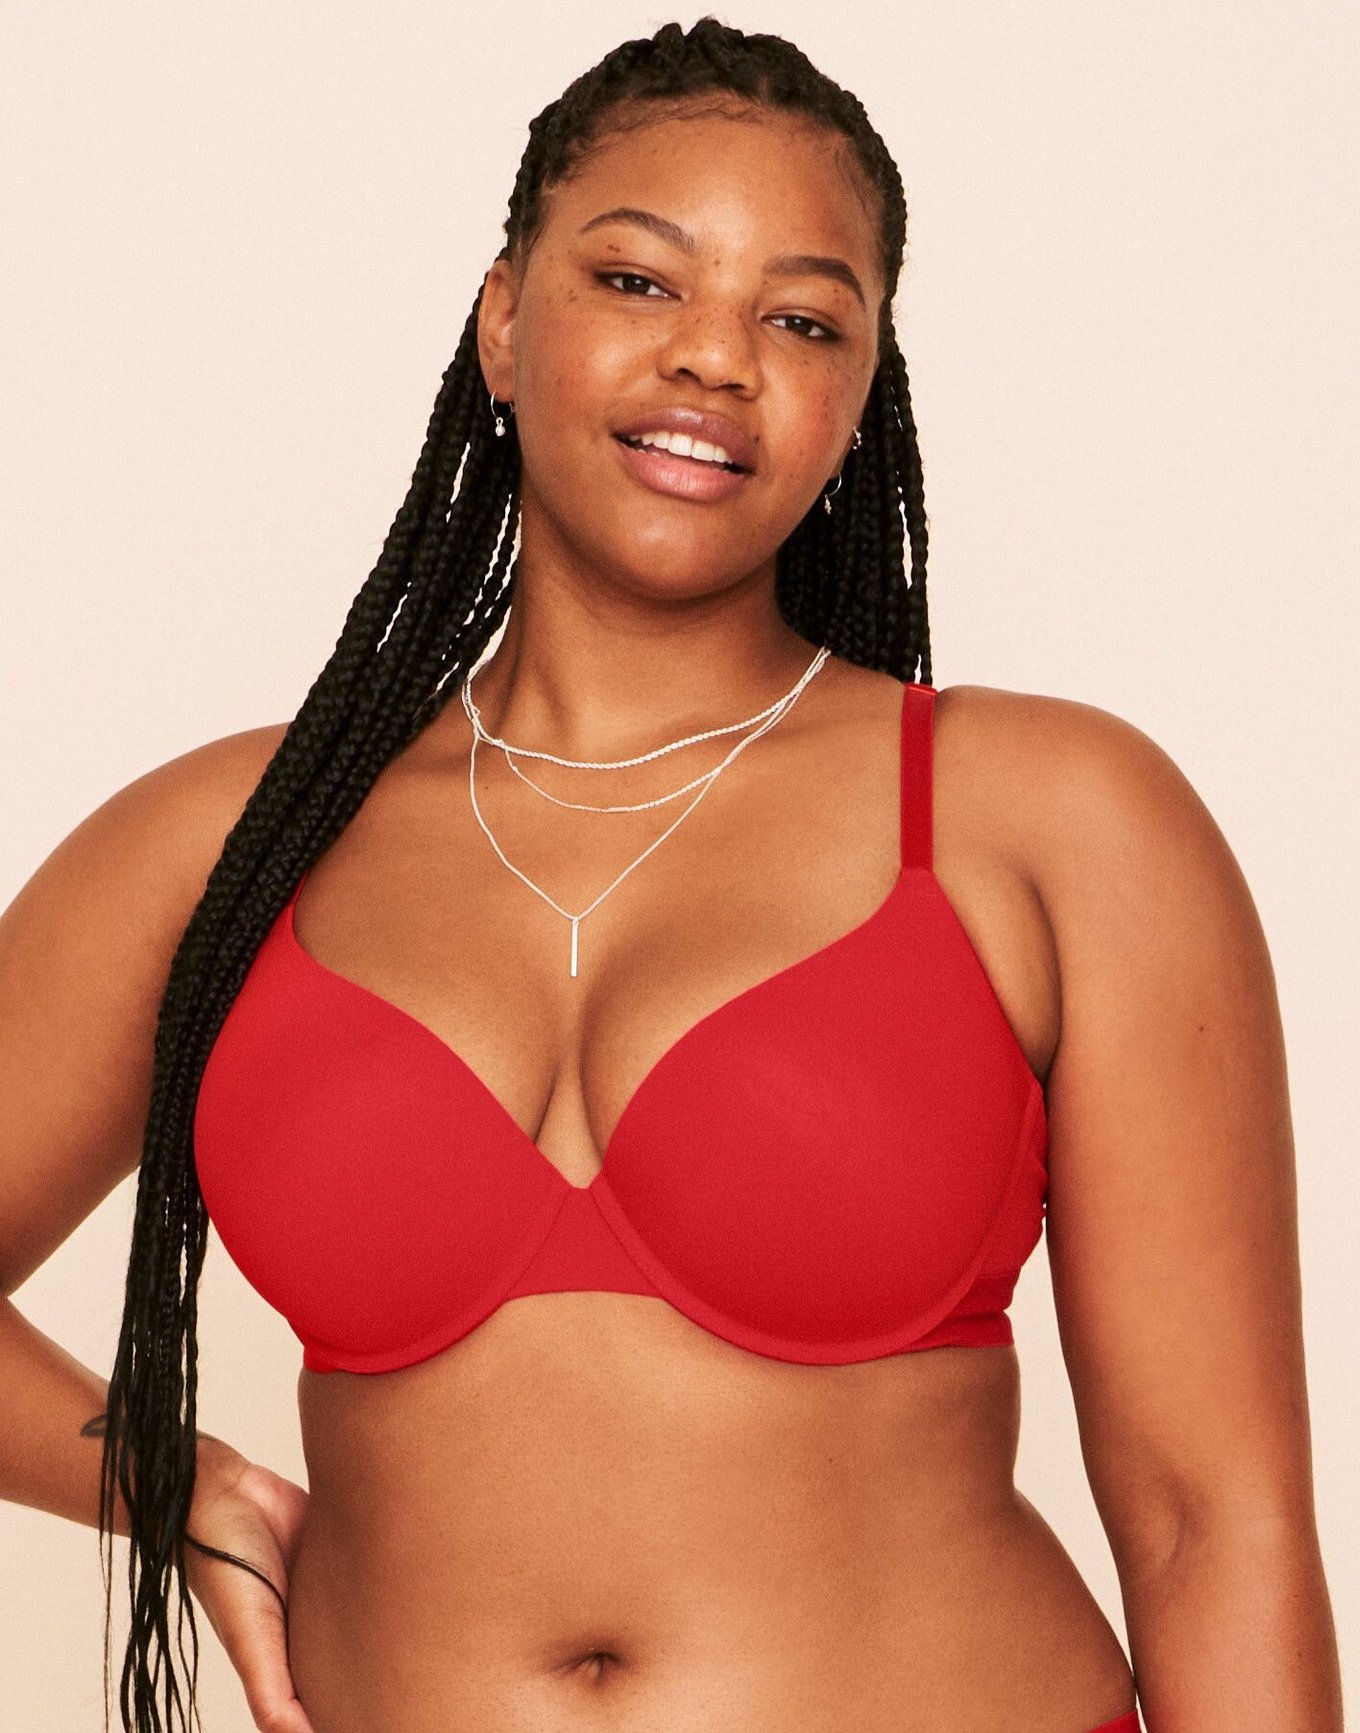  g Cup Size red Sports Bra Push up Bralette hot Women